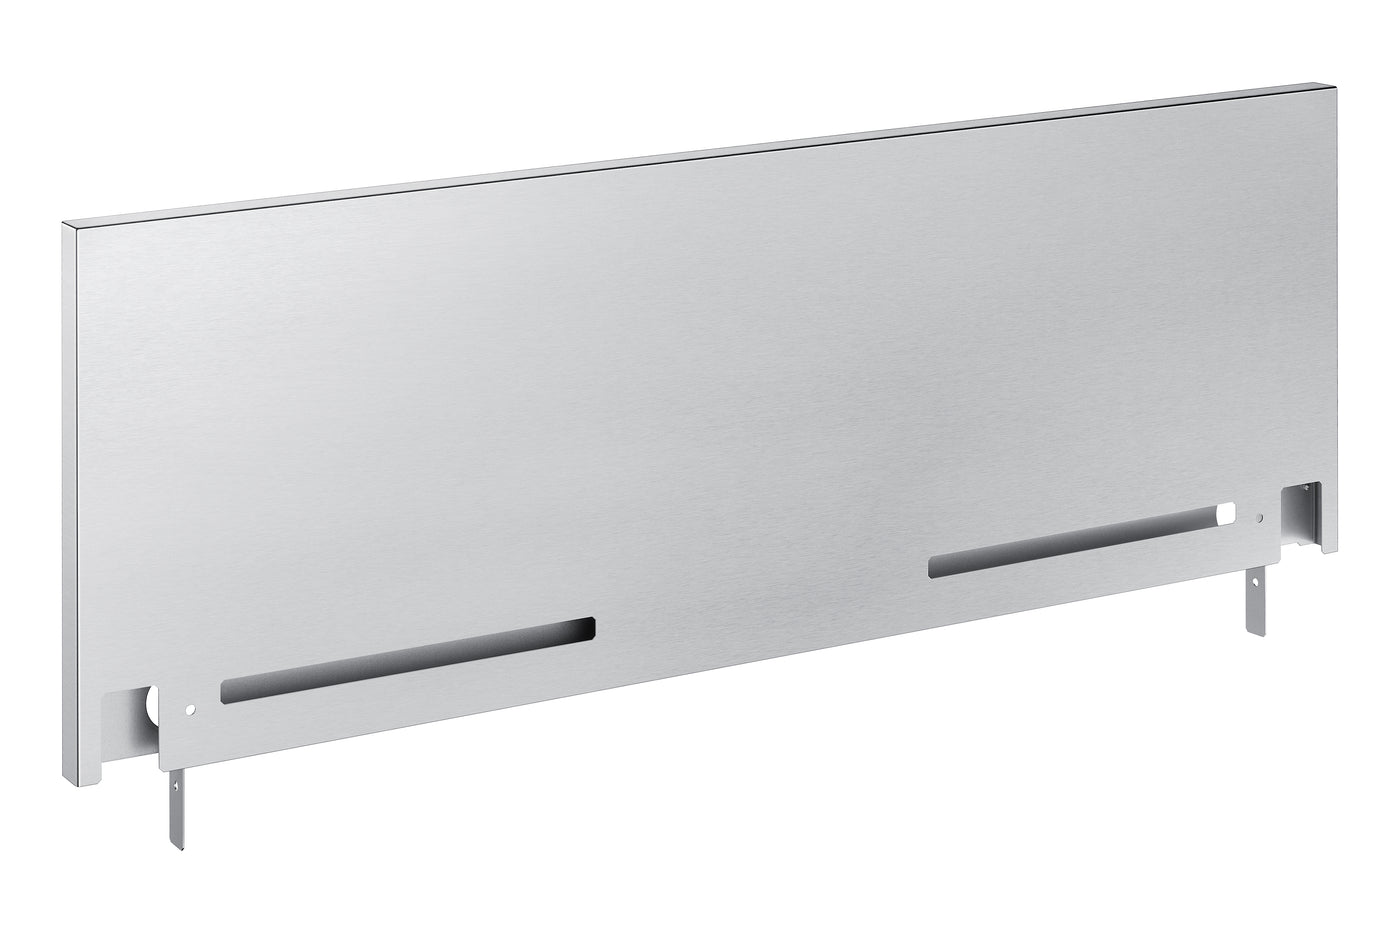 Samsung Stainless Steel 9" Back Guard - NX-AB5900RS/AA